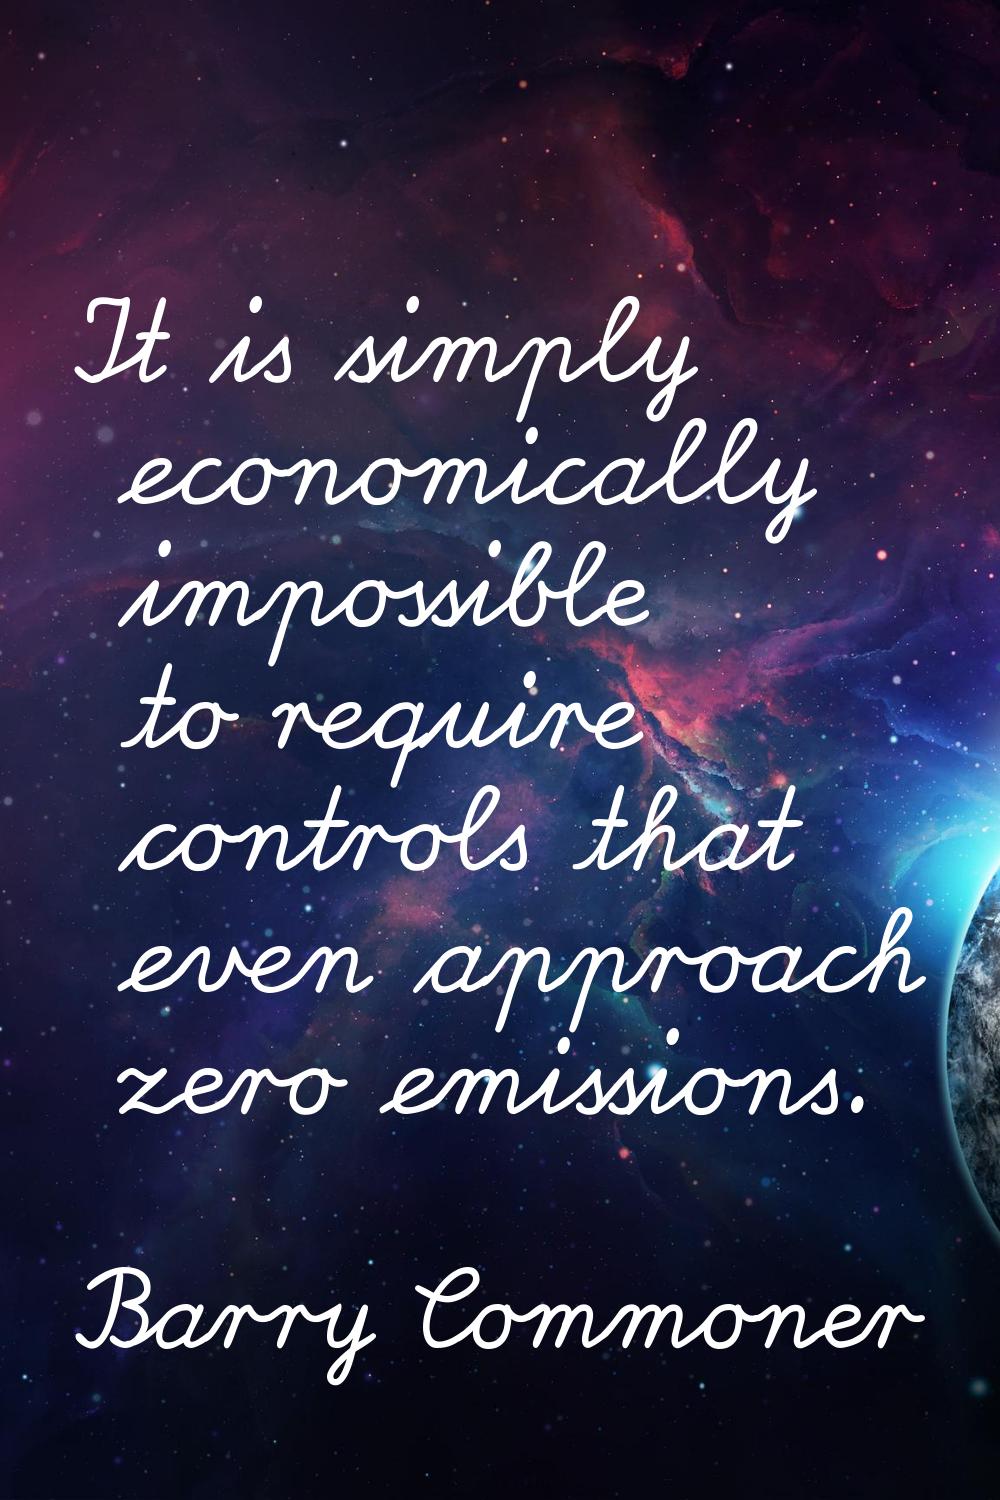 It is simply economically impossible to require controls that even approach zero emissions.